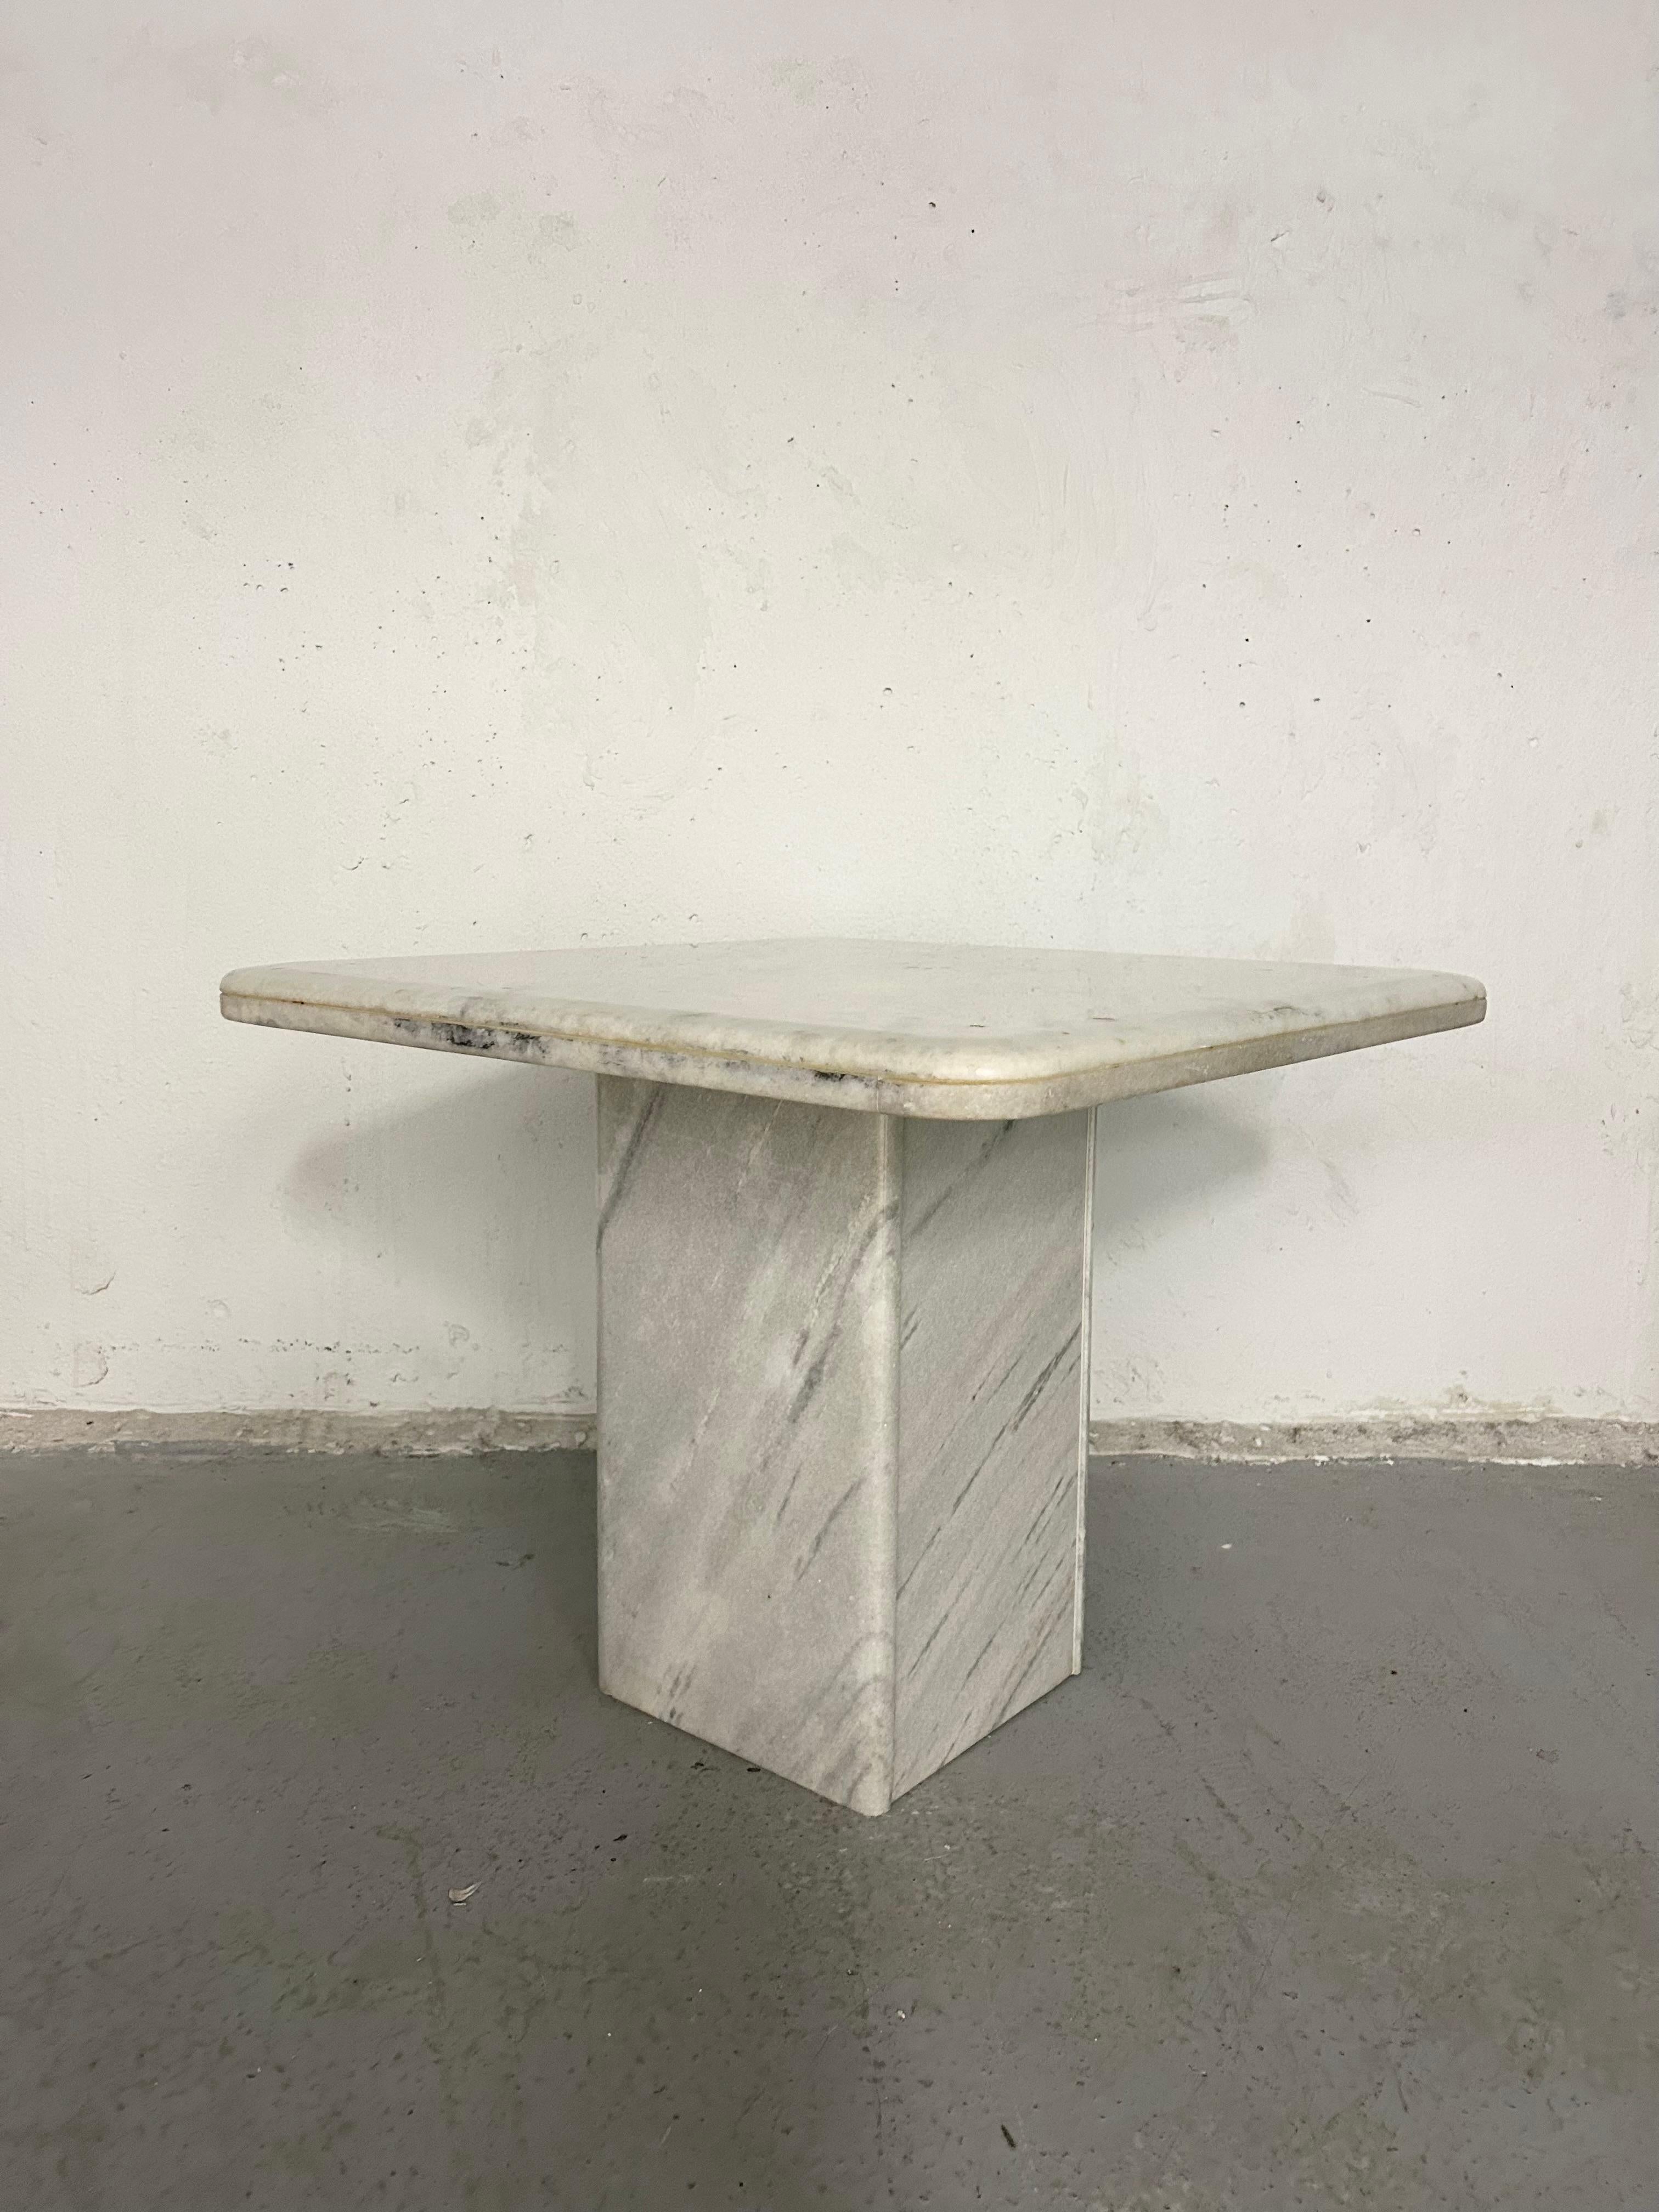 Vintage Carrara marble side table. Could also be used as coffee table or nightstand. No chips or cracks in the marble. Normal vintage wear. There are a few small chips in the polyurethane sealant on the table top but are very subtle and not that